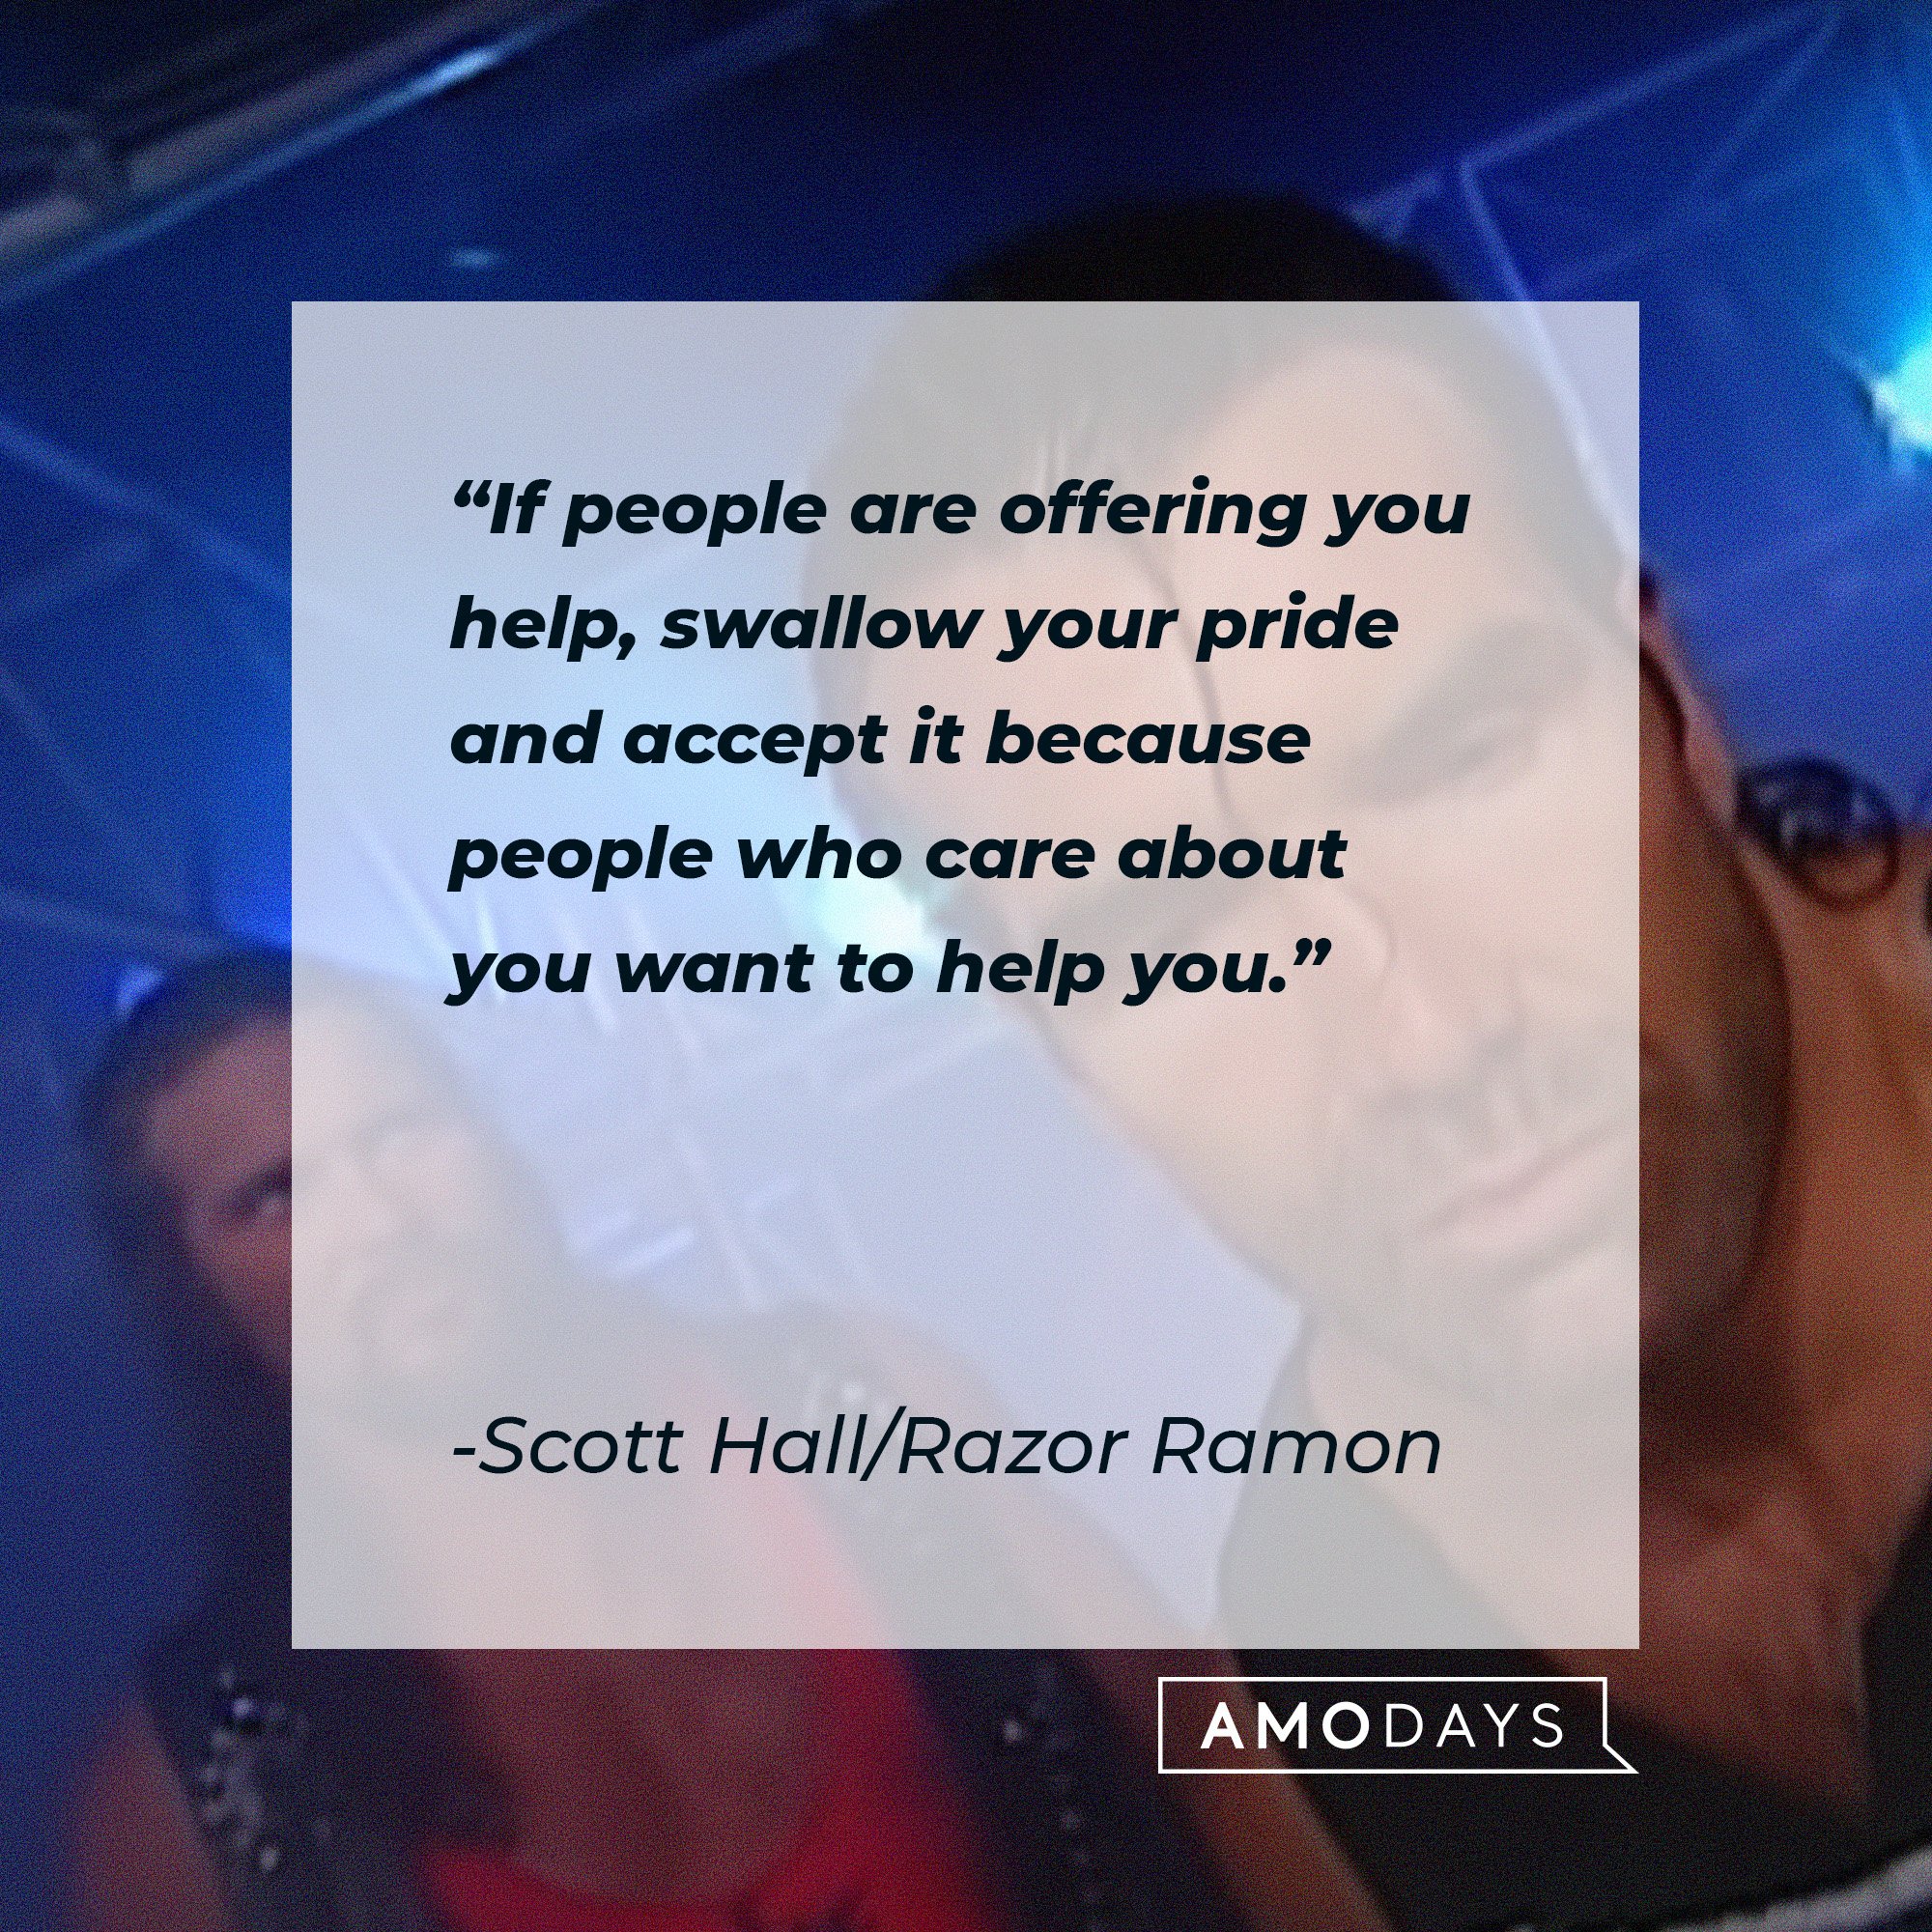 Scott Hall/Razor Ramon’s quote: "If people are offering you help, swallow your pride and accept it because people who care about you want to help you." | Image: AmoDays